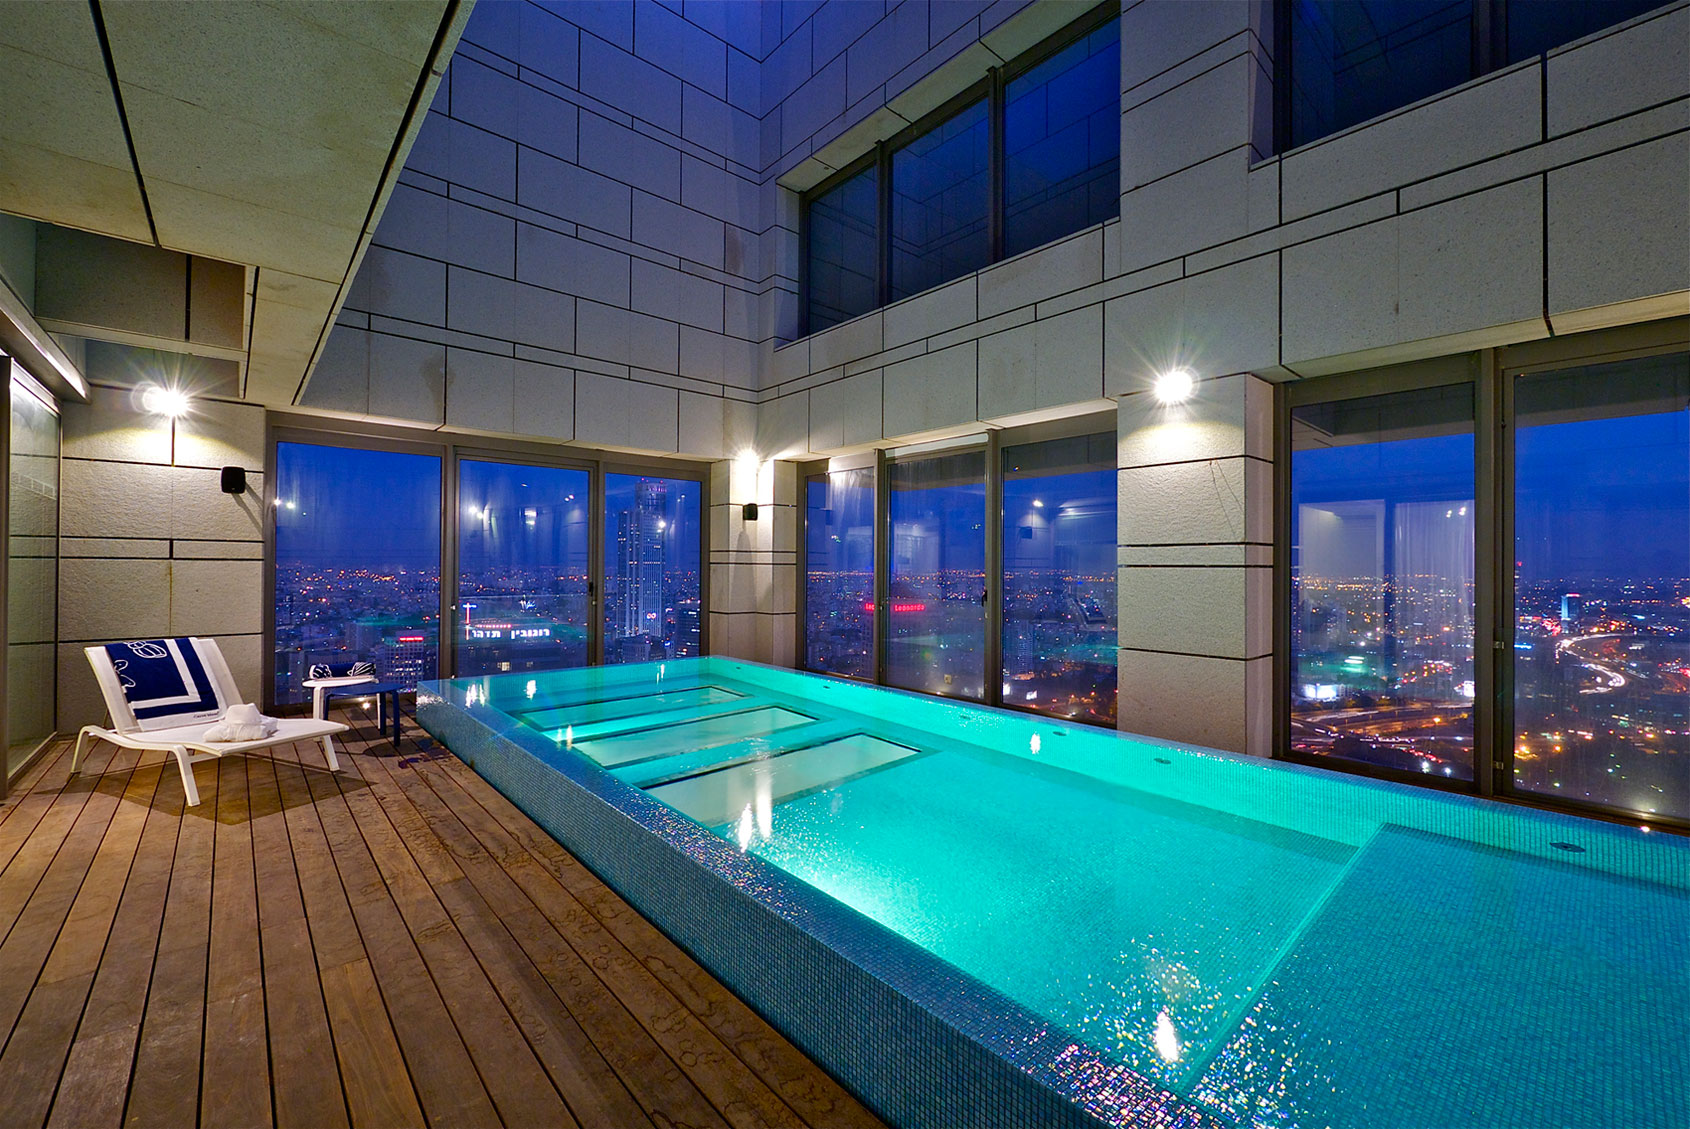 Stunning Penthouse With Private Rooftop Swimming Pool | iDesignArch